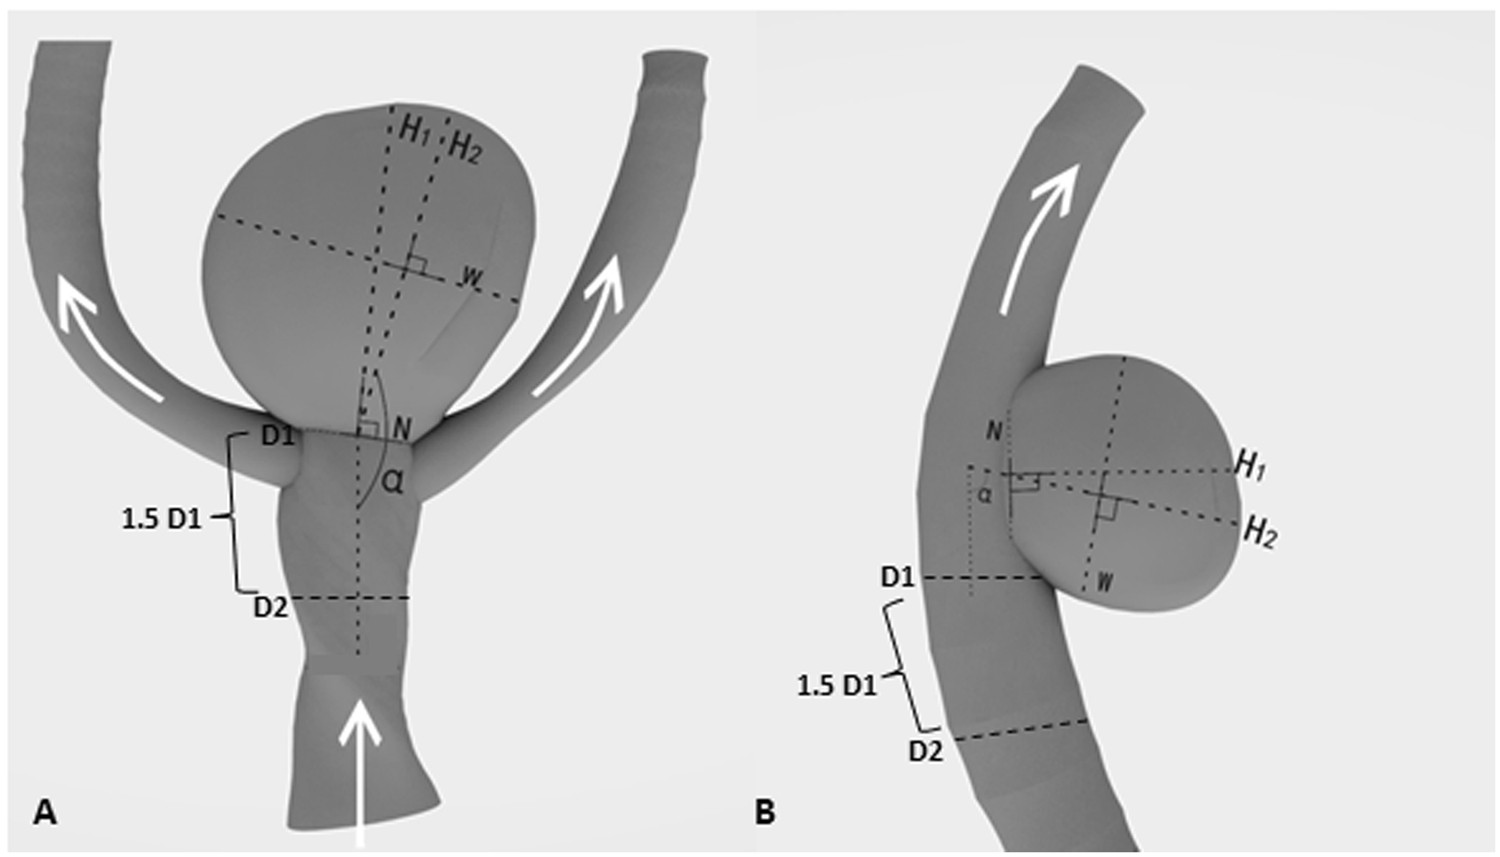 Morphological parameters and anatomical locations associated with rupture  status of small intracranial aneurysms | Scientific Reports